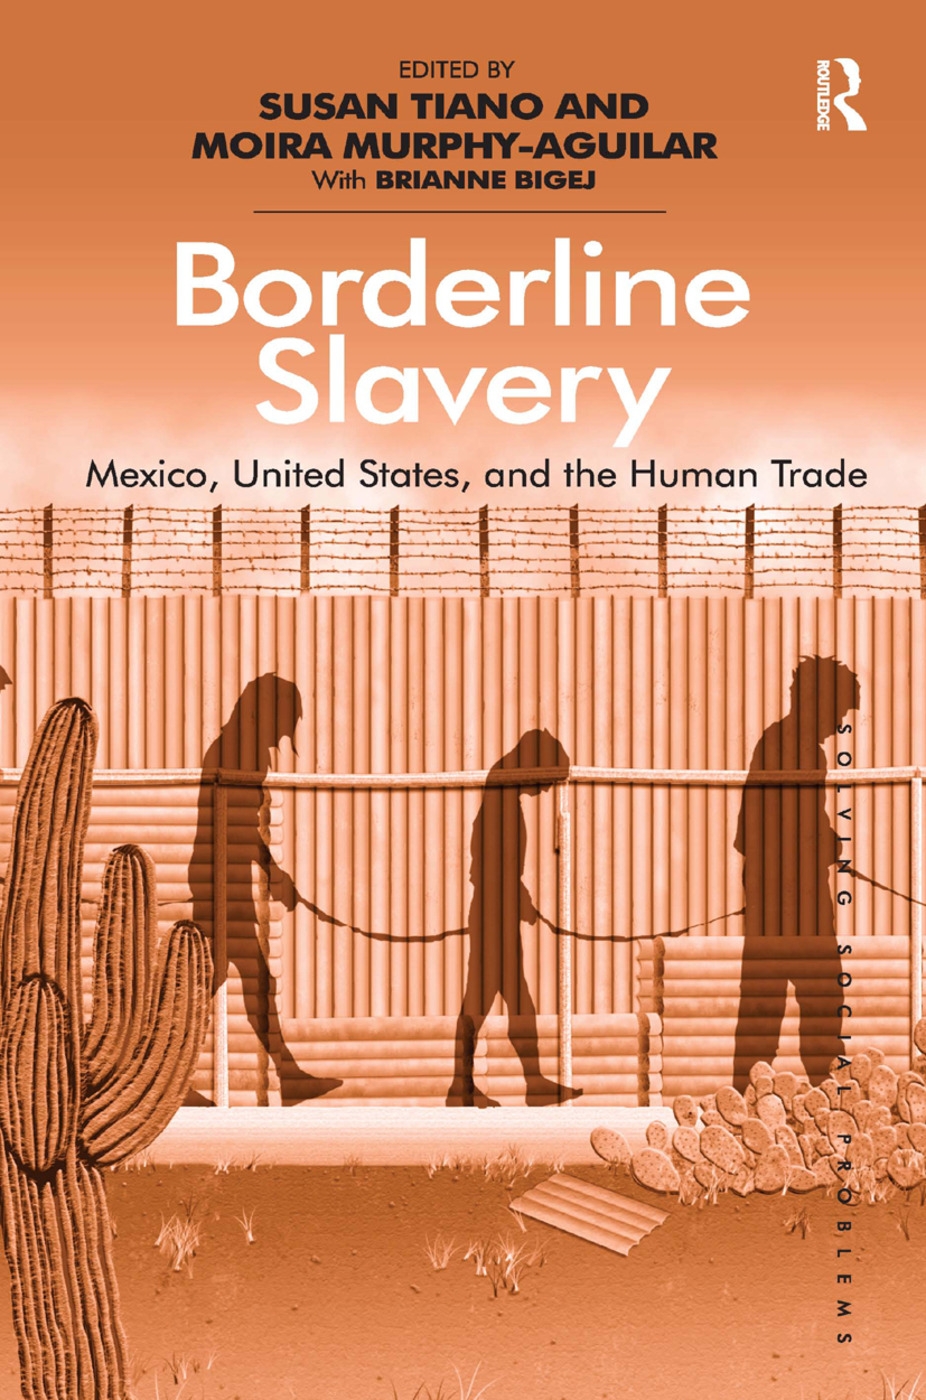 Borderline Slavery: Mexico, United States, and the Human Trade. Edited by Susan Tiano and Moira Murphy-Aguilar with Brianne Bigej